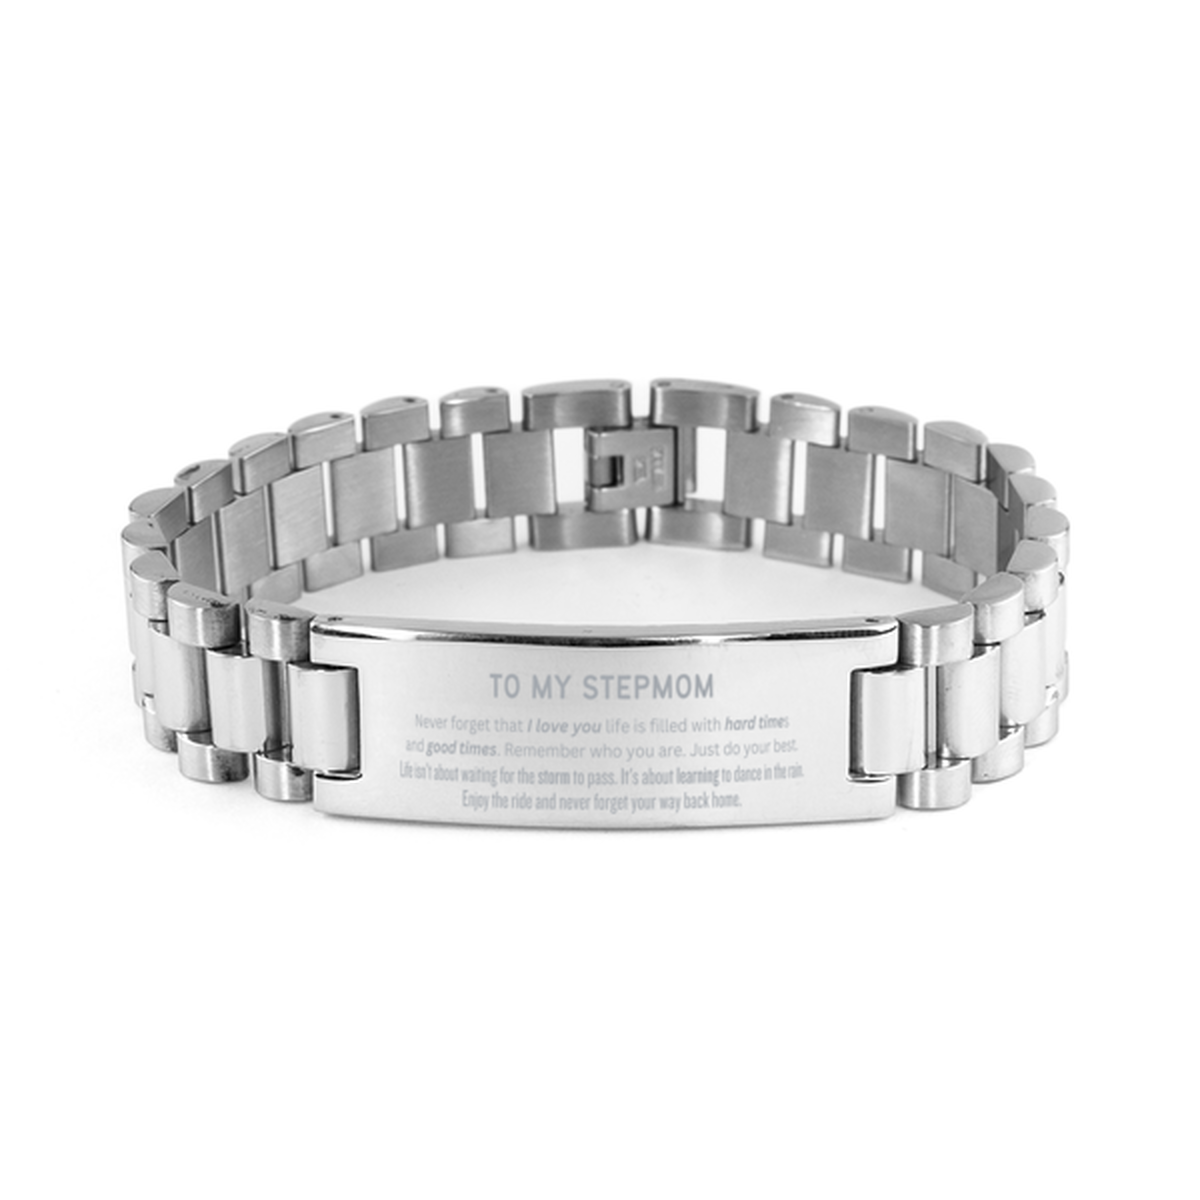 Christmas Stepmom Ladder Stainless Steel Bracelet Gifts, To My Stepmom Birthday Thank You Gifts For Stepmom, Graduation Unique Gifts For Stepmom To My Stepmom Never forget that I love you life is filled with hard times and good times. Remember who you are